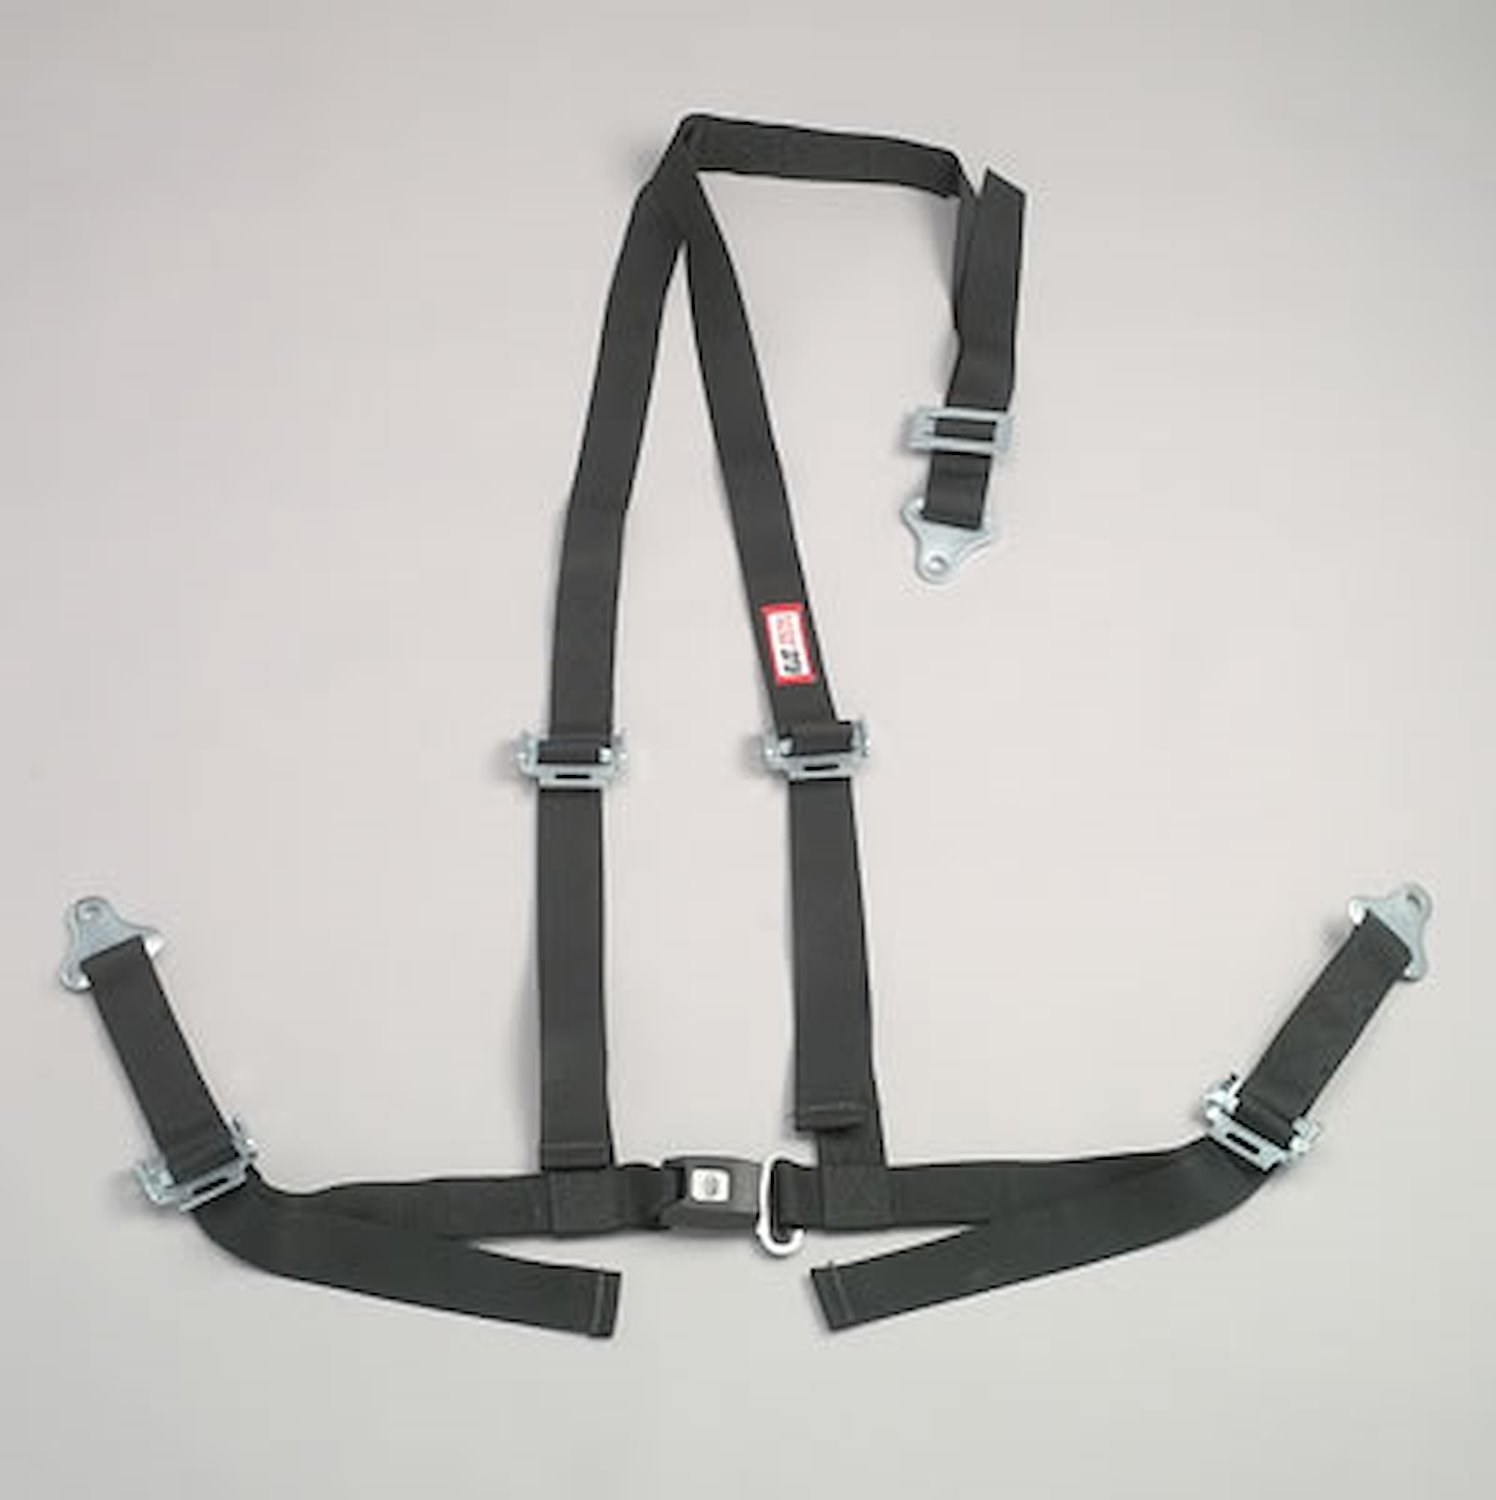 NON-SFI B&T HARNESS 2 PULL UP Lap Belt SNAP 2 S. H. Individual ROLL BAR Mount WRAP/SNAP w/STERNUM STRAP OD GREEN